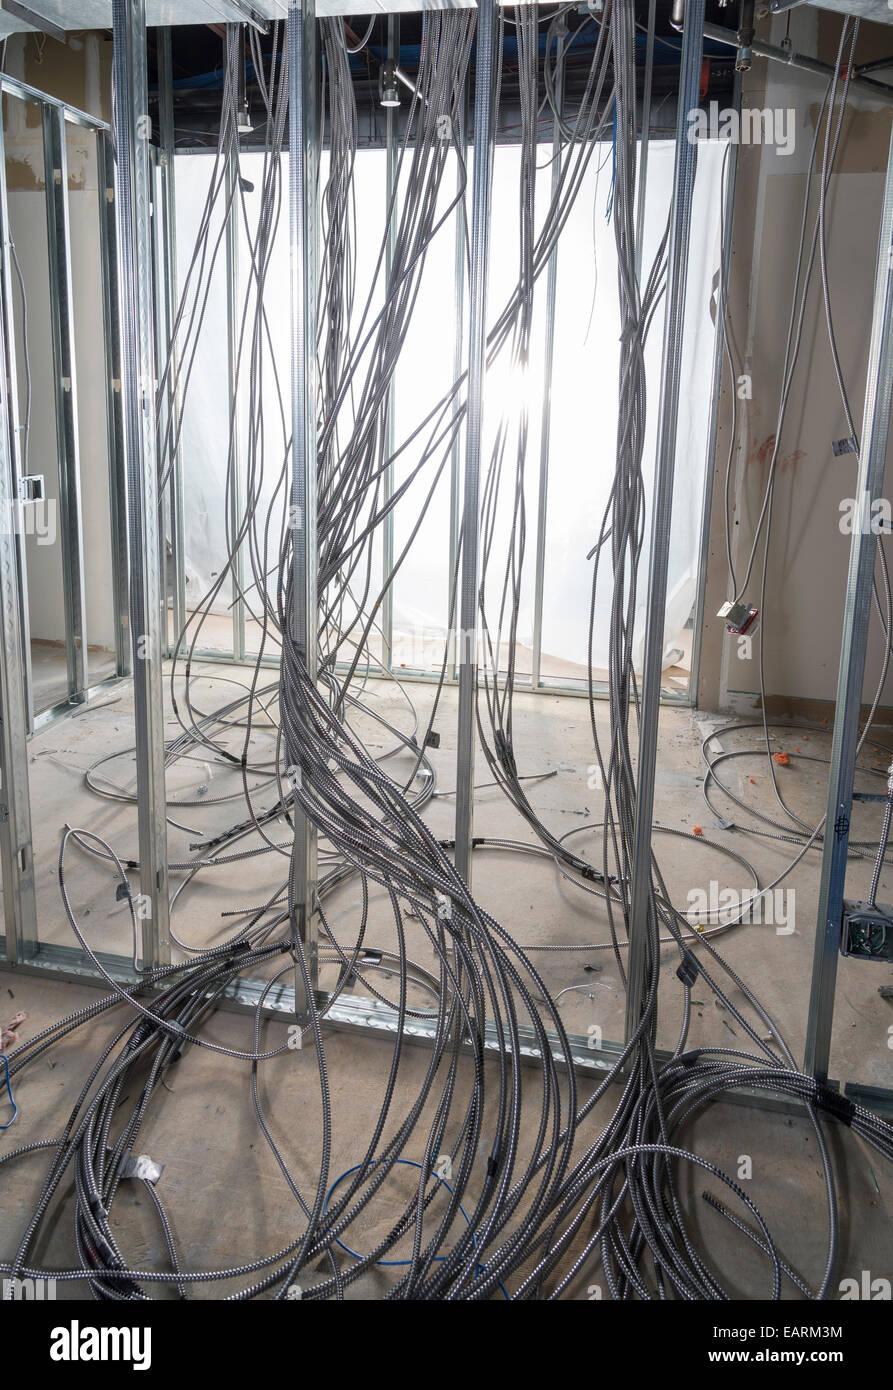 Tangle Of Electric Cables At Construction Site Stock Photo